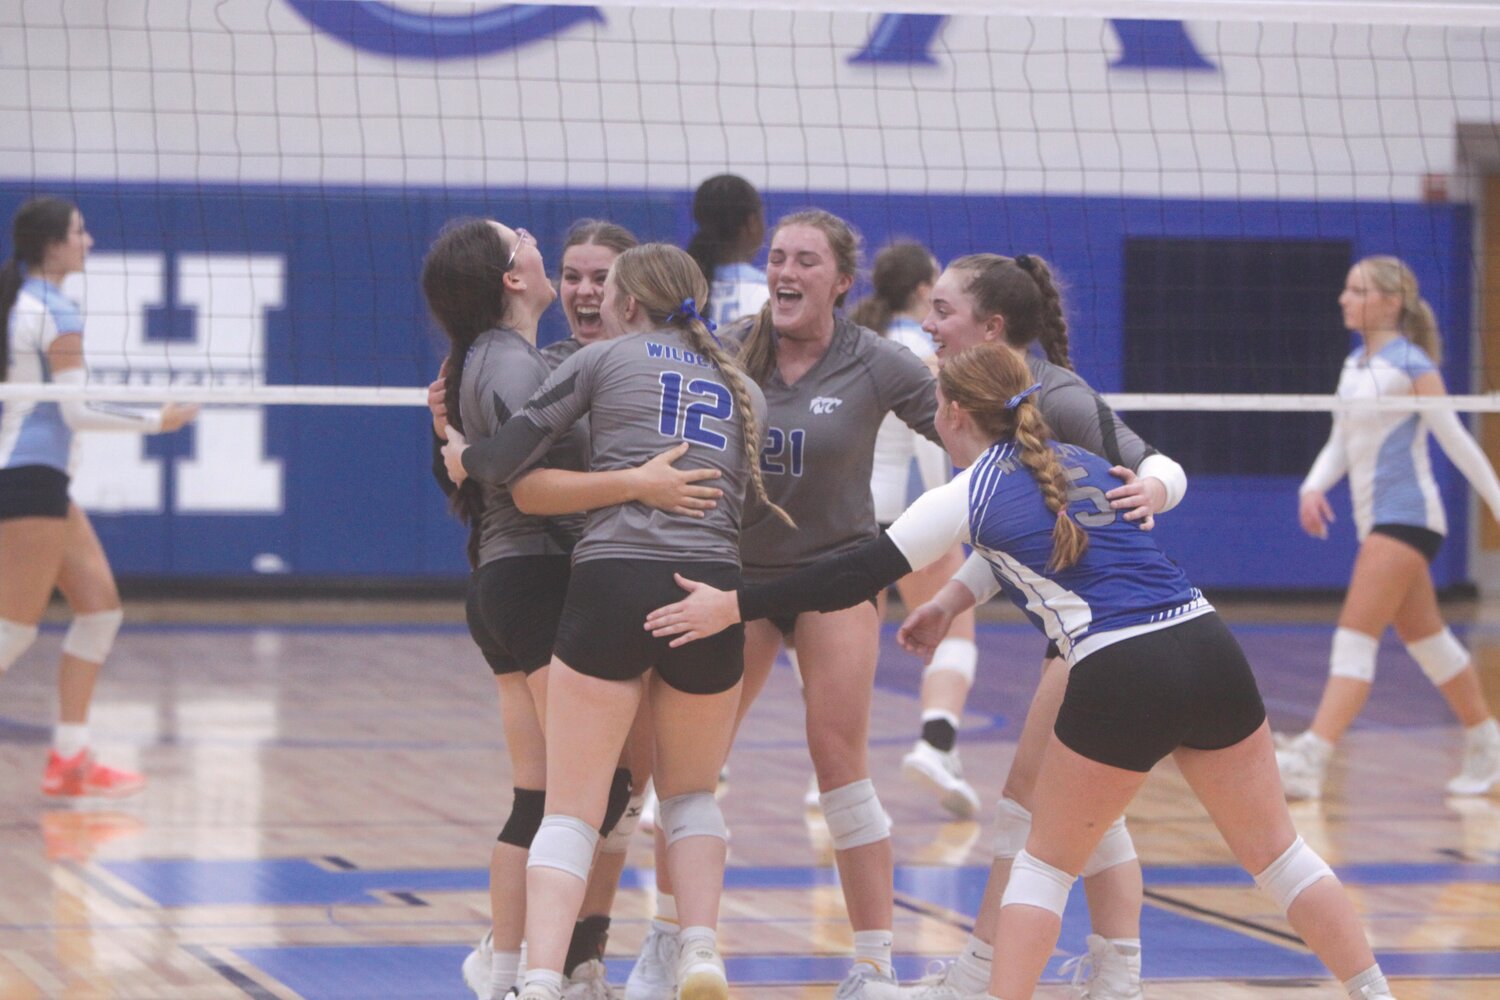 The Montgomery County volleyball team celebrates a point in the third game against Tolton Catholic in a Class 2, District 6 semifinal match on Oct. 19. The Wildcats finished their season at 12-12-4.